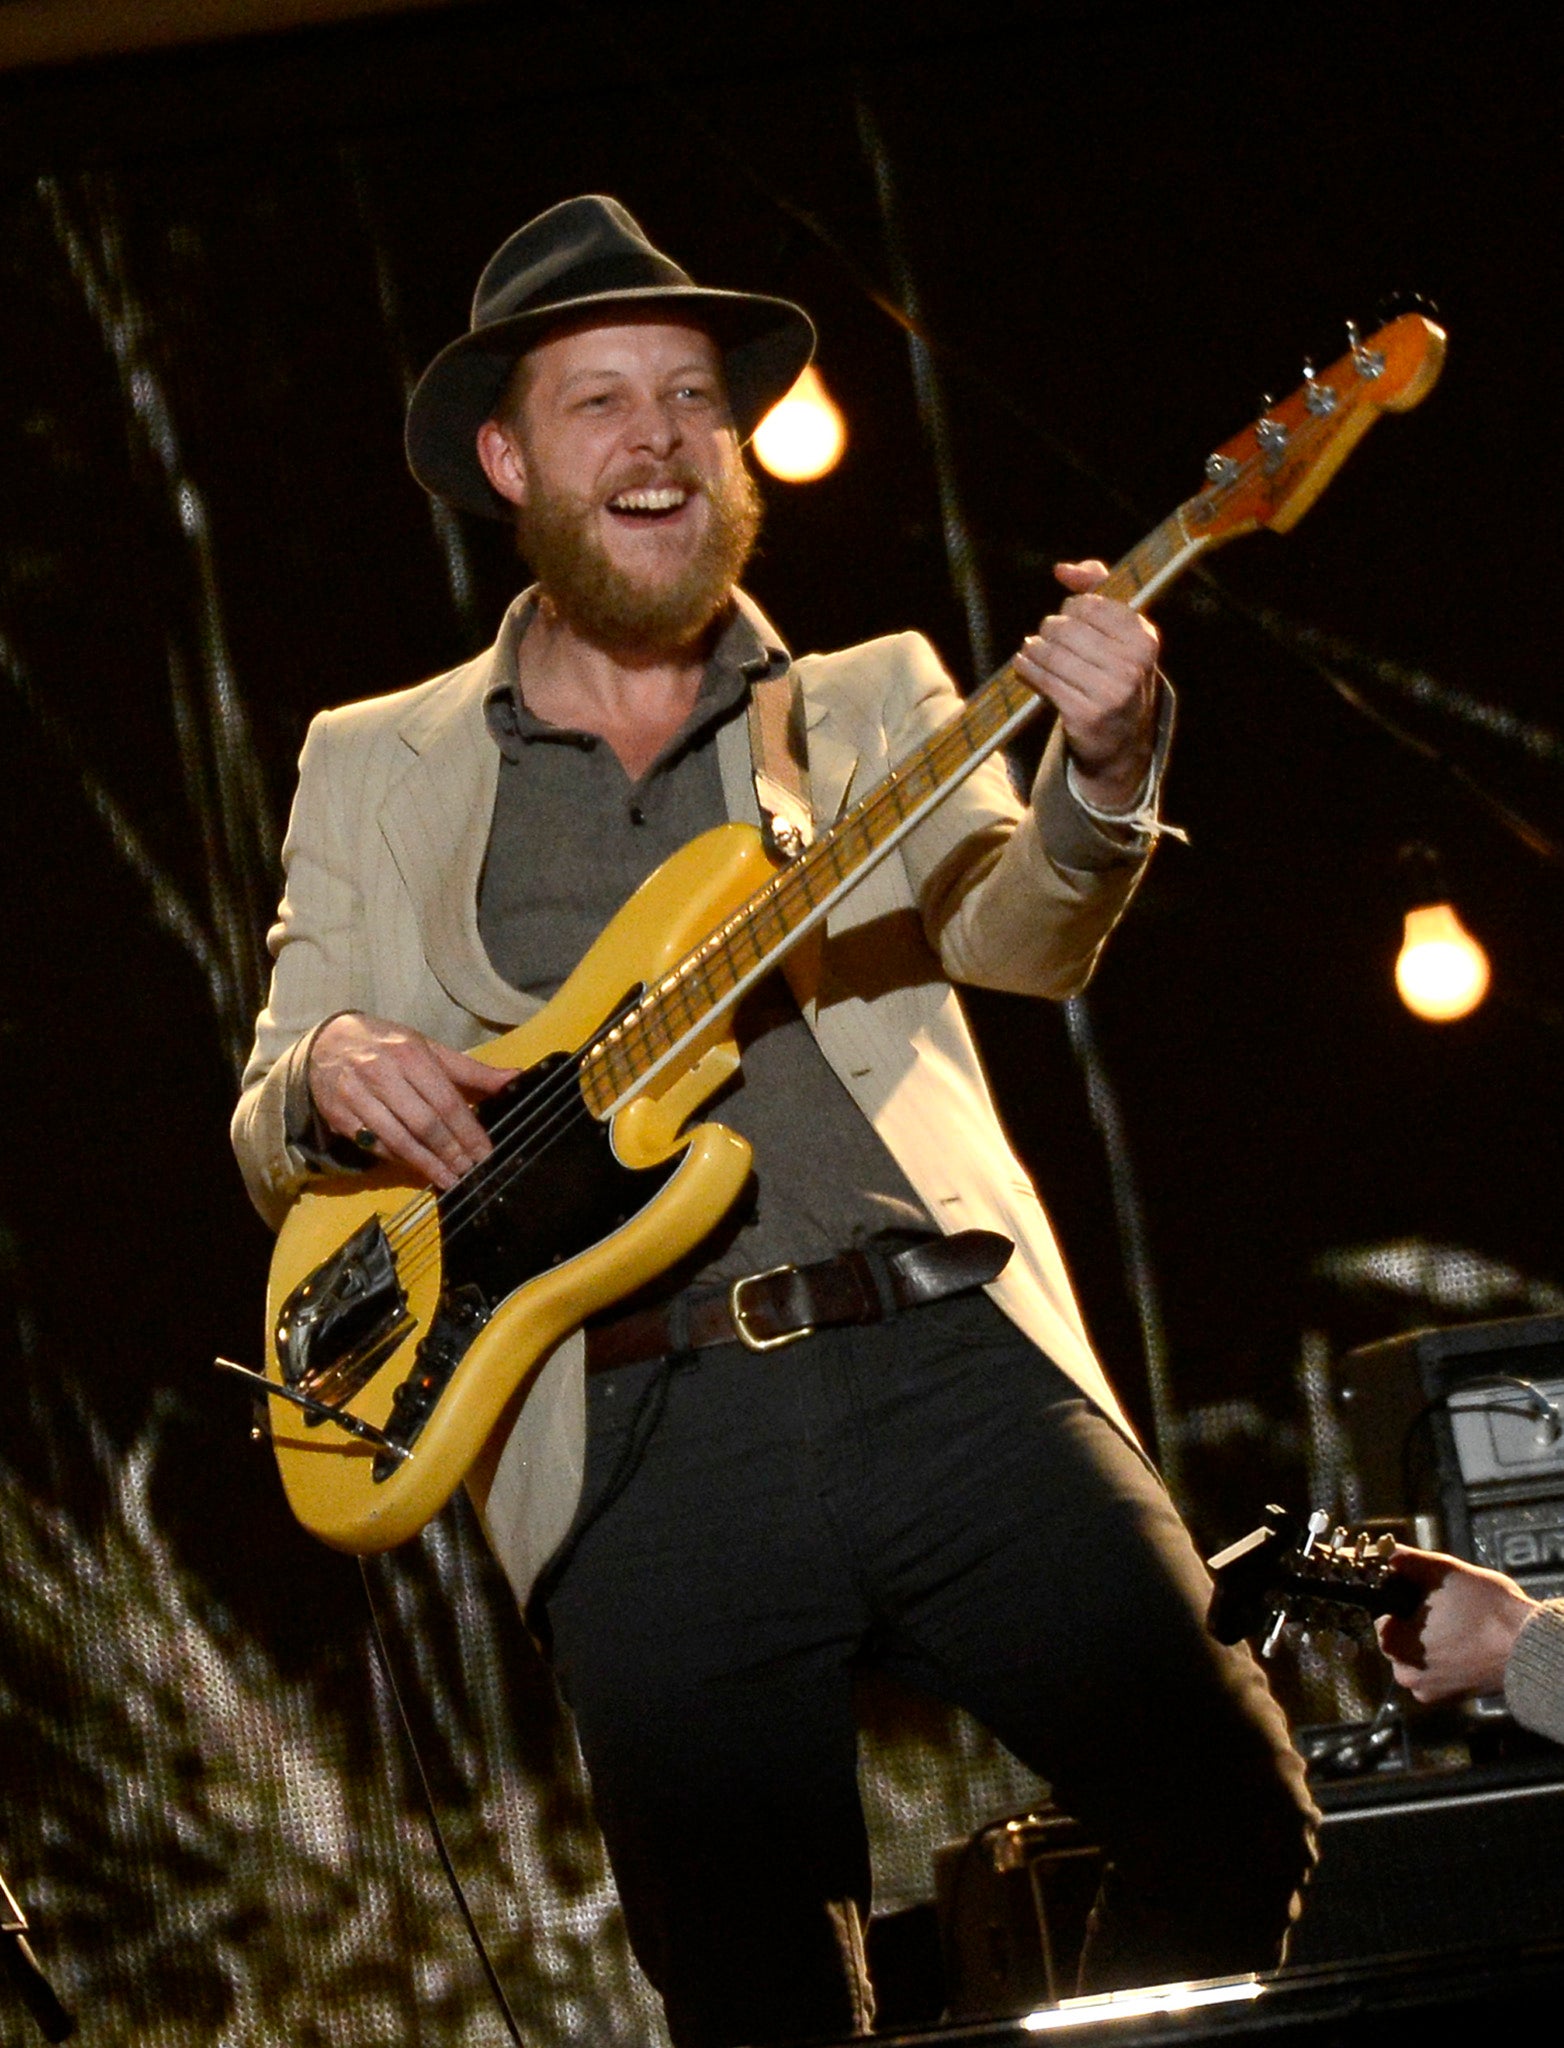 Mumford & Sons bassist Ted Dwane is currently receiving emergency treatment in hospital.